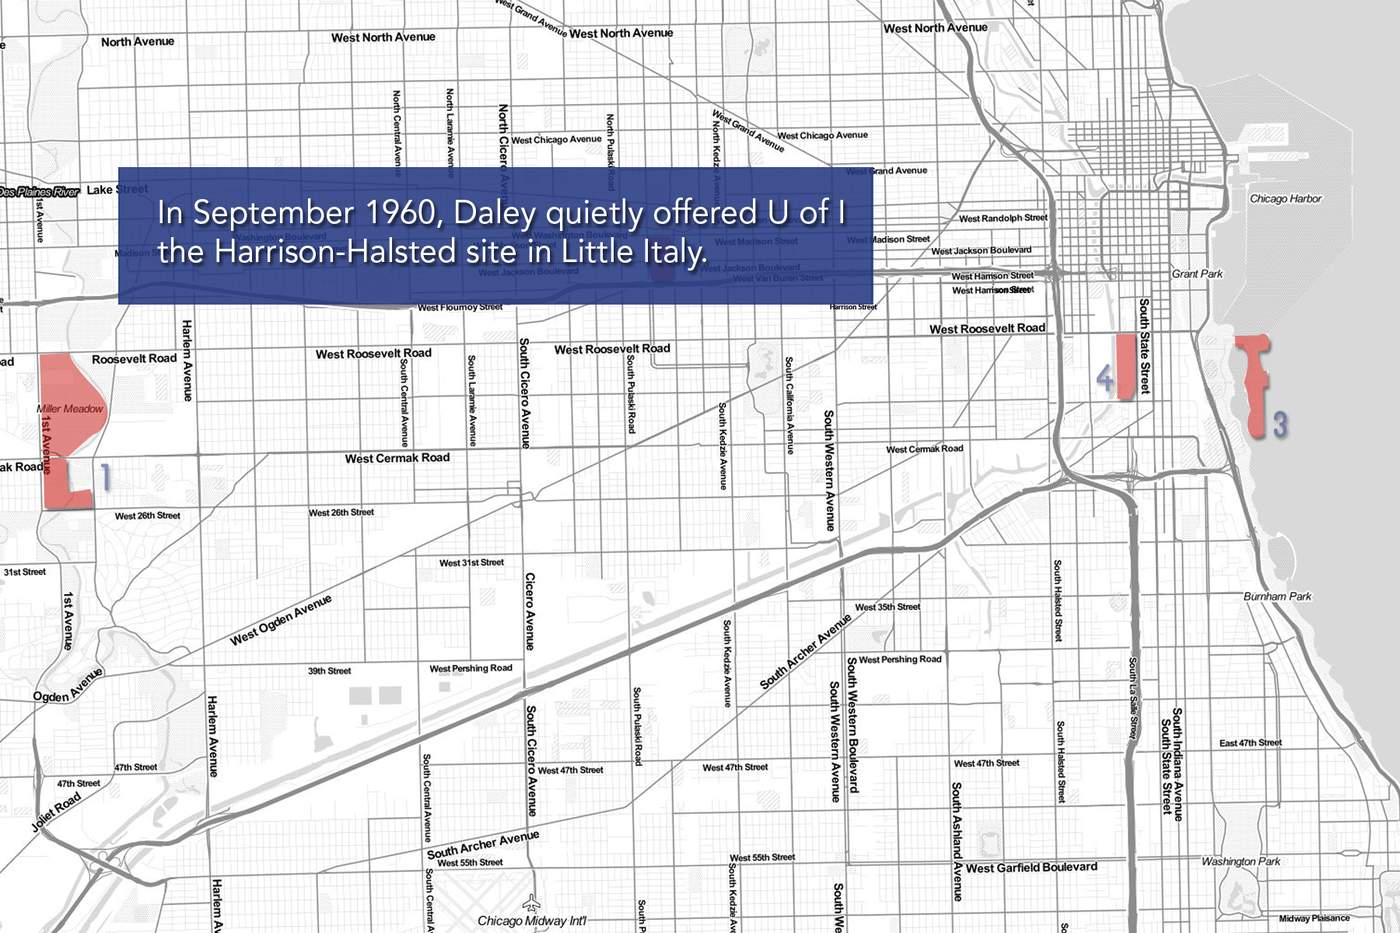 In December of 1960, Daley quietly offered U of I the Harrison-Halsted site in Little Italy.